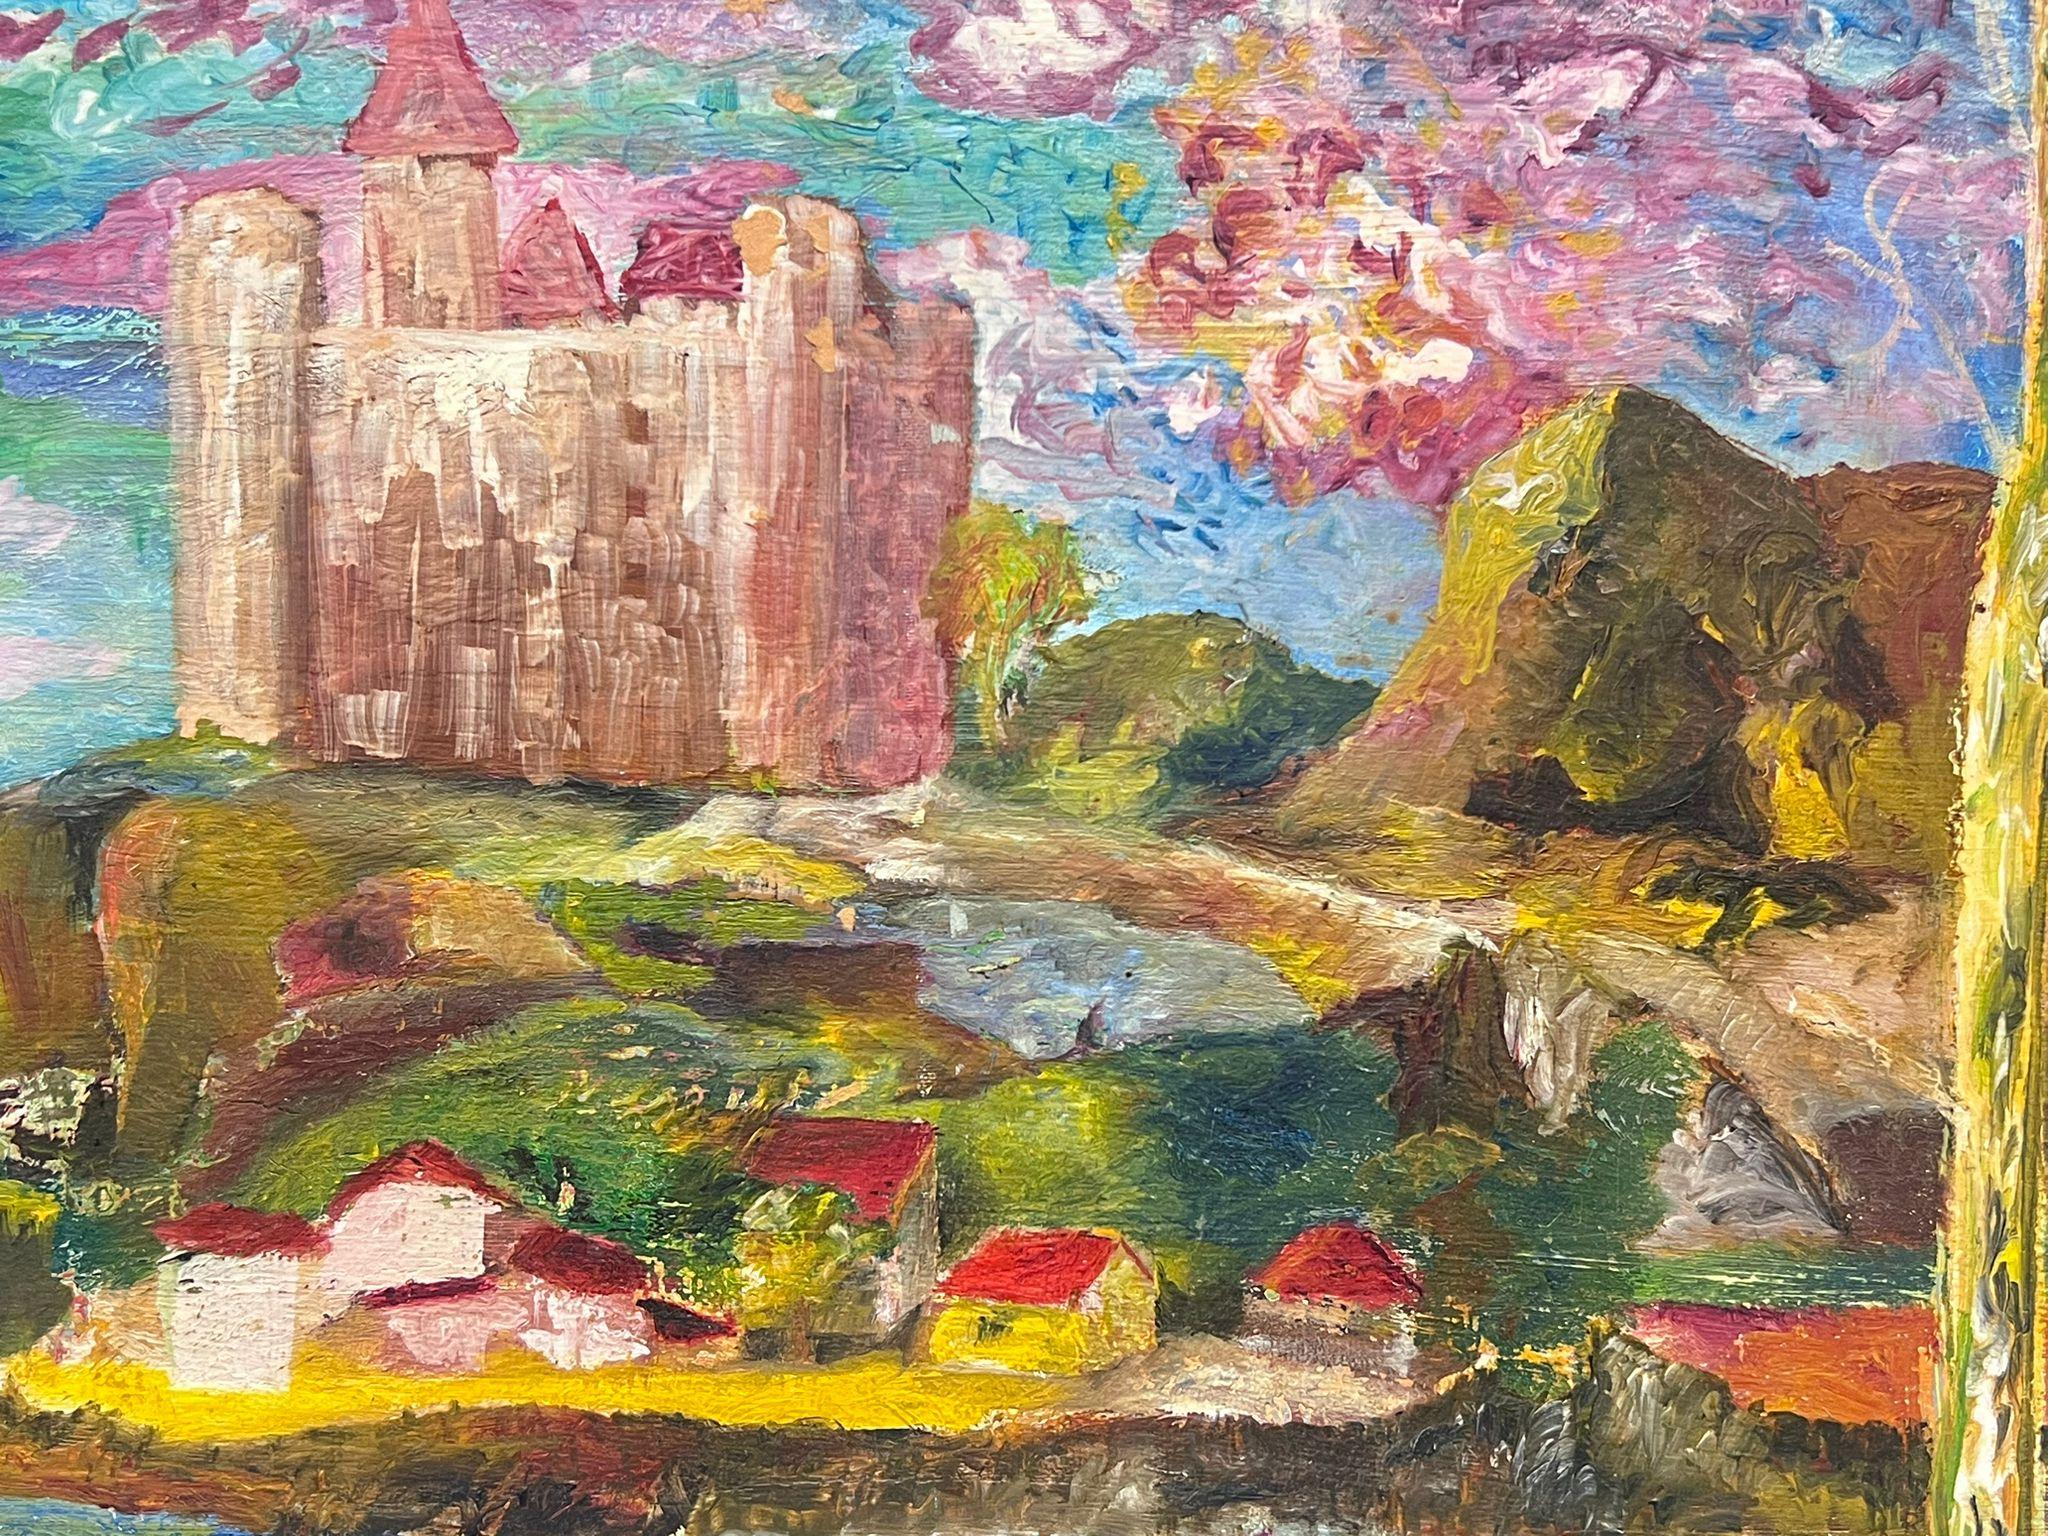 French Expressionist Fantasy Landscape Pink Castle Over Magical Village - Painting by Jacques Coulais (1955-2011)